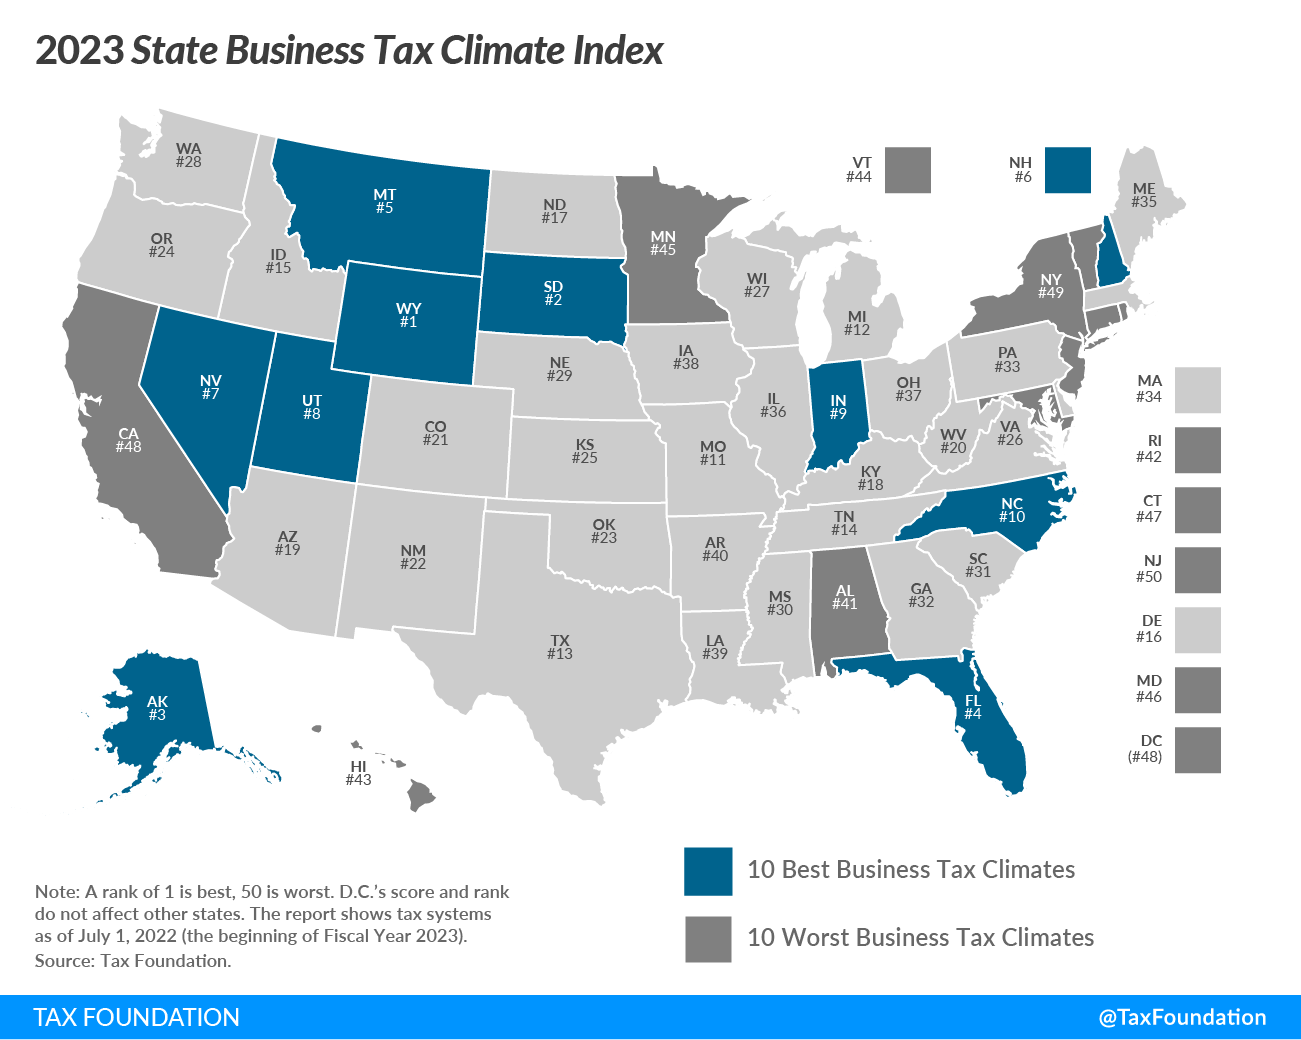 2023 state business tax climate index 2023 state tax climate rankings 2023 state tax rankings